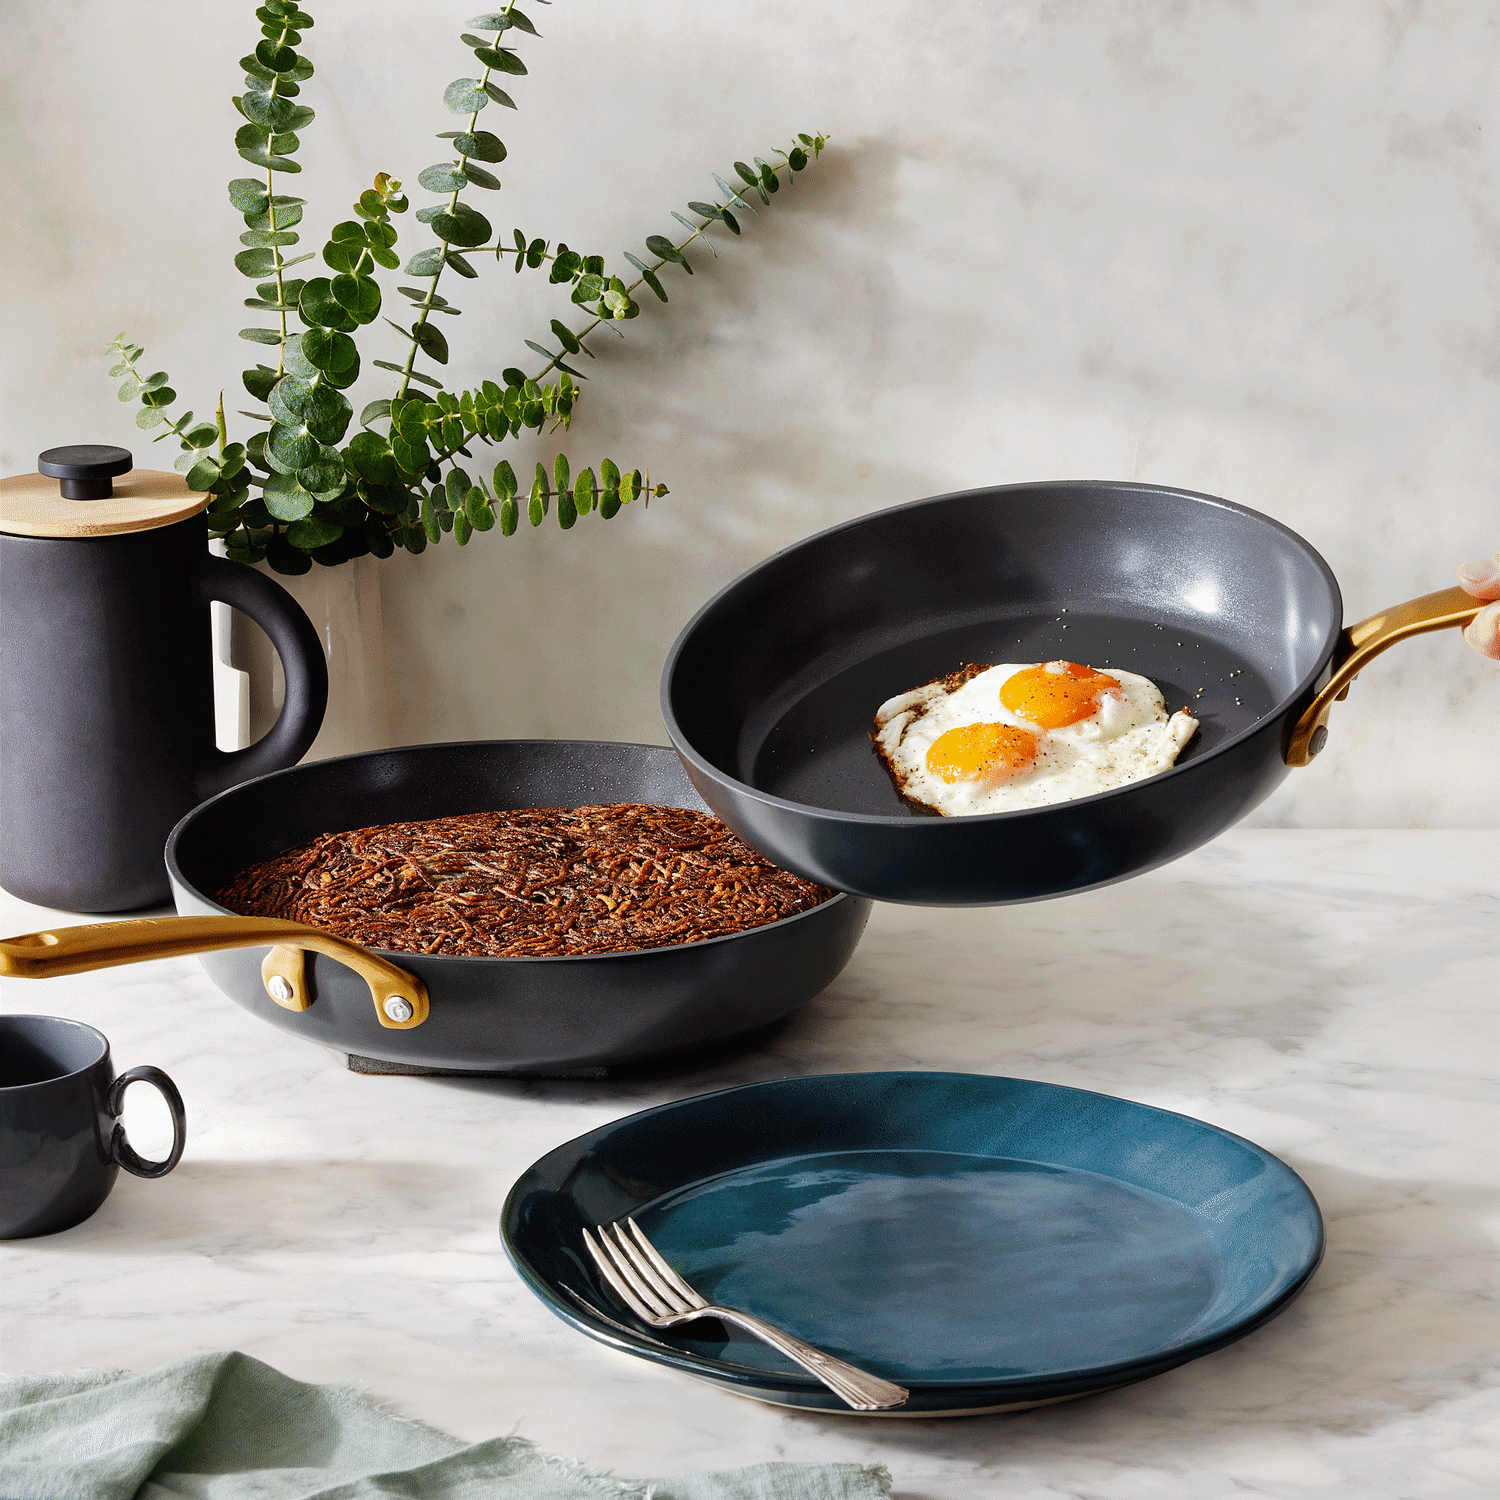 Food52 x GreenPan Nonstick Wooden-Handled Cookware Collection on Food52